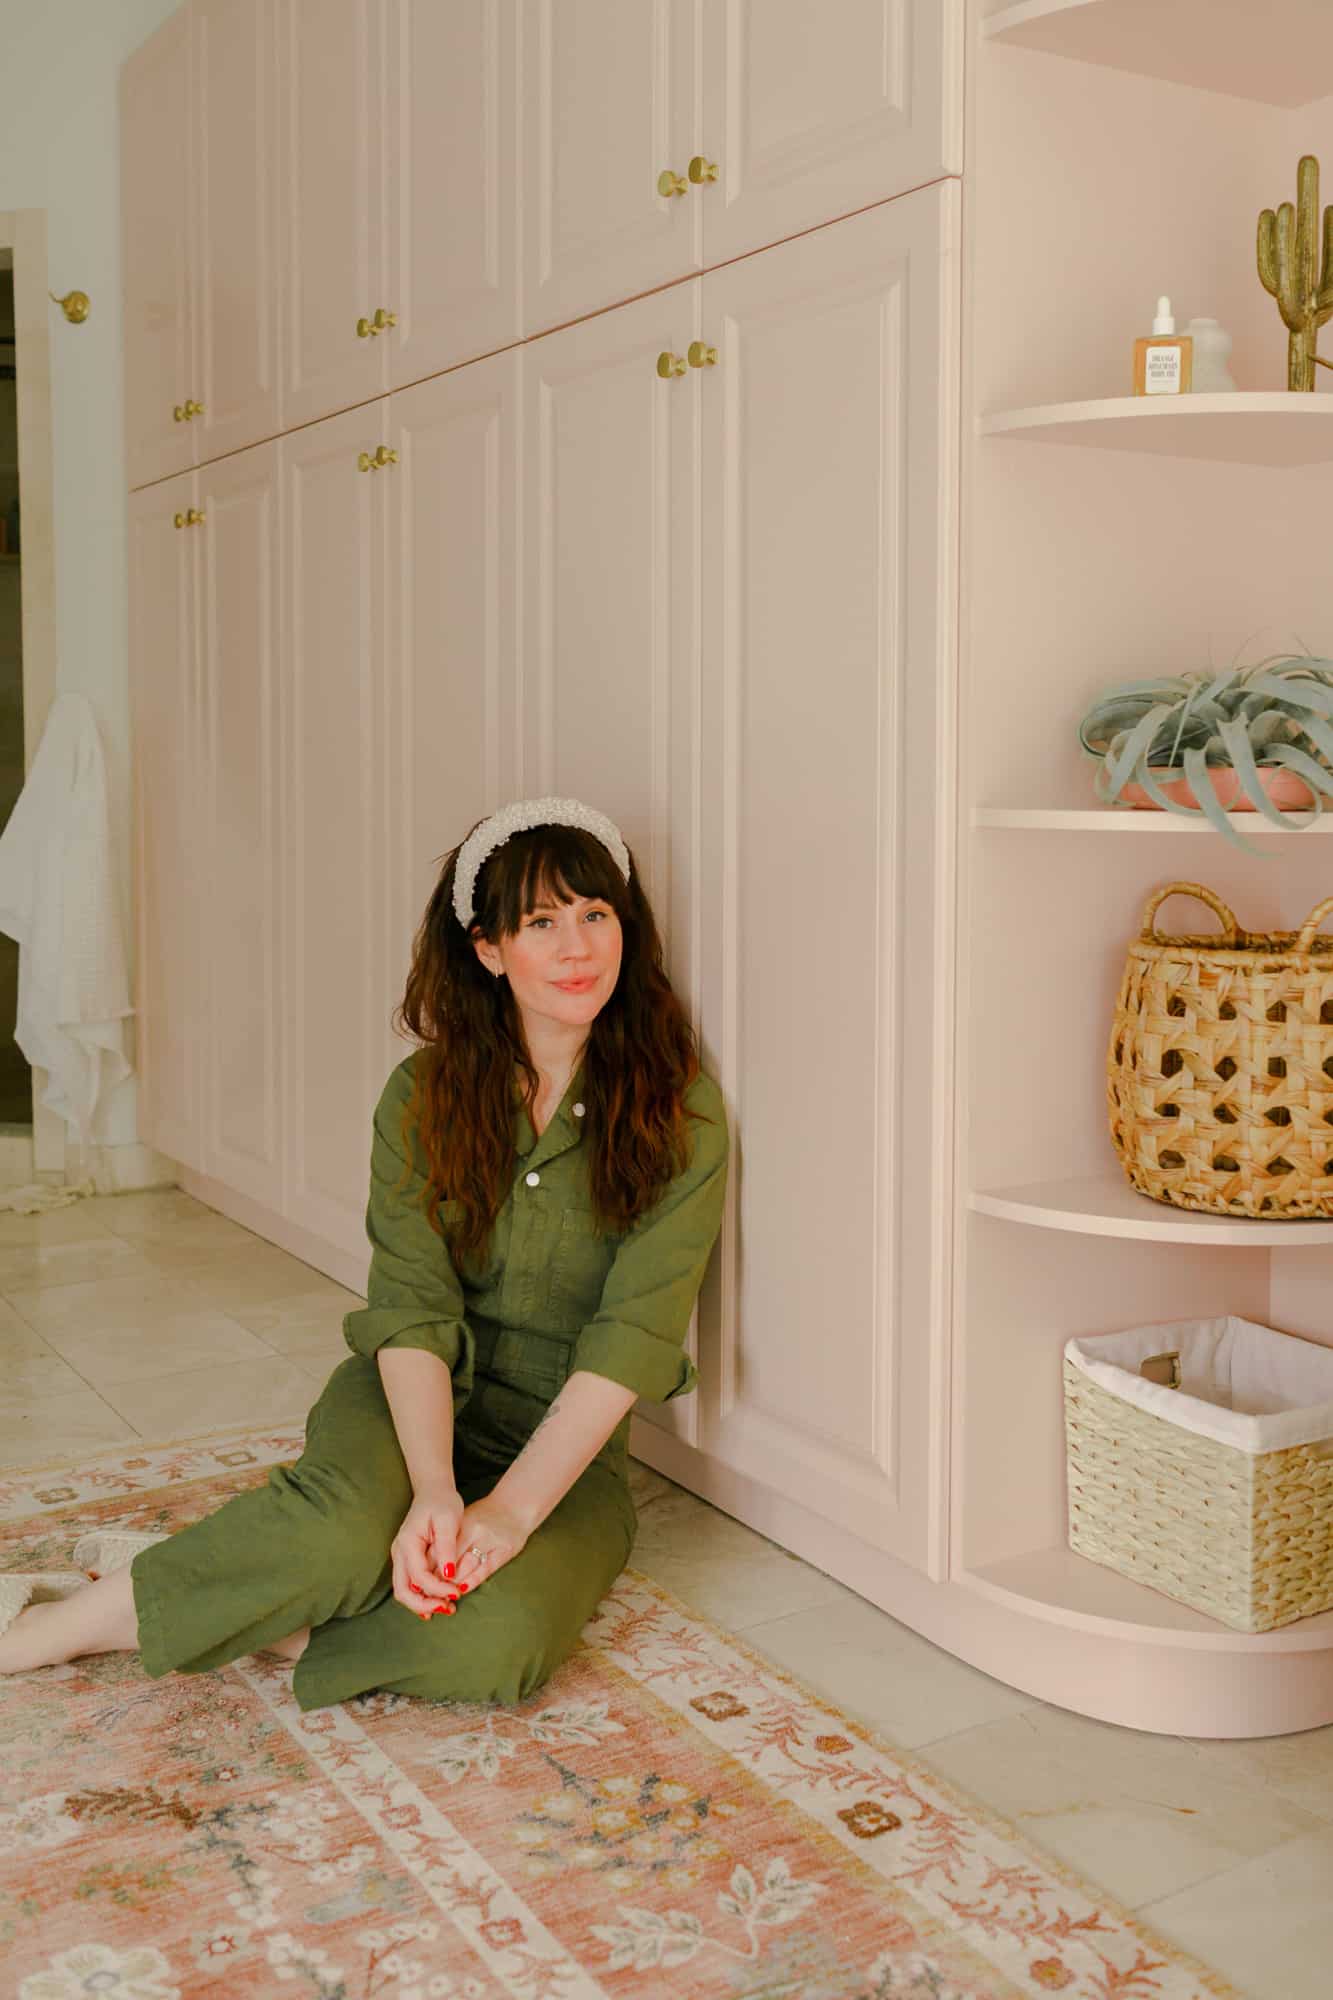 Elsie wearing  green jumpsuit with a white headband sitting on the floor in front of pink cabinets